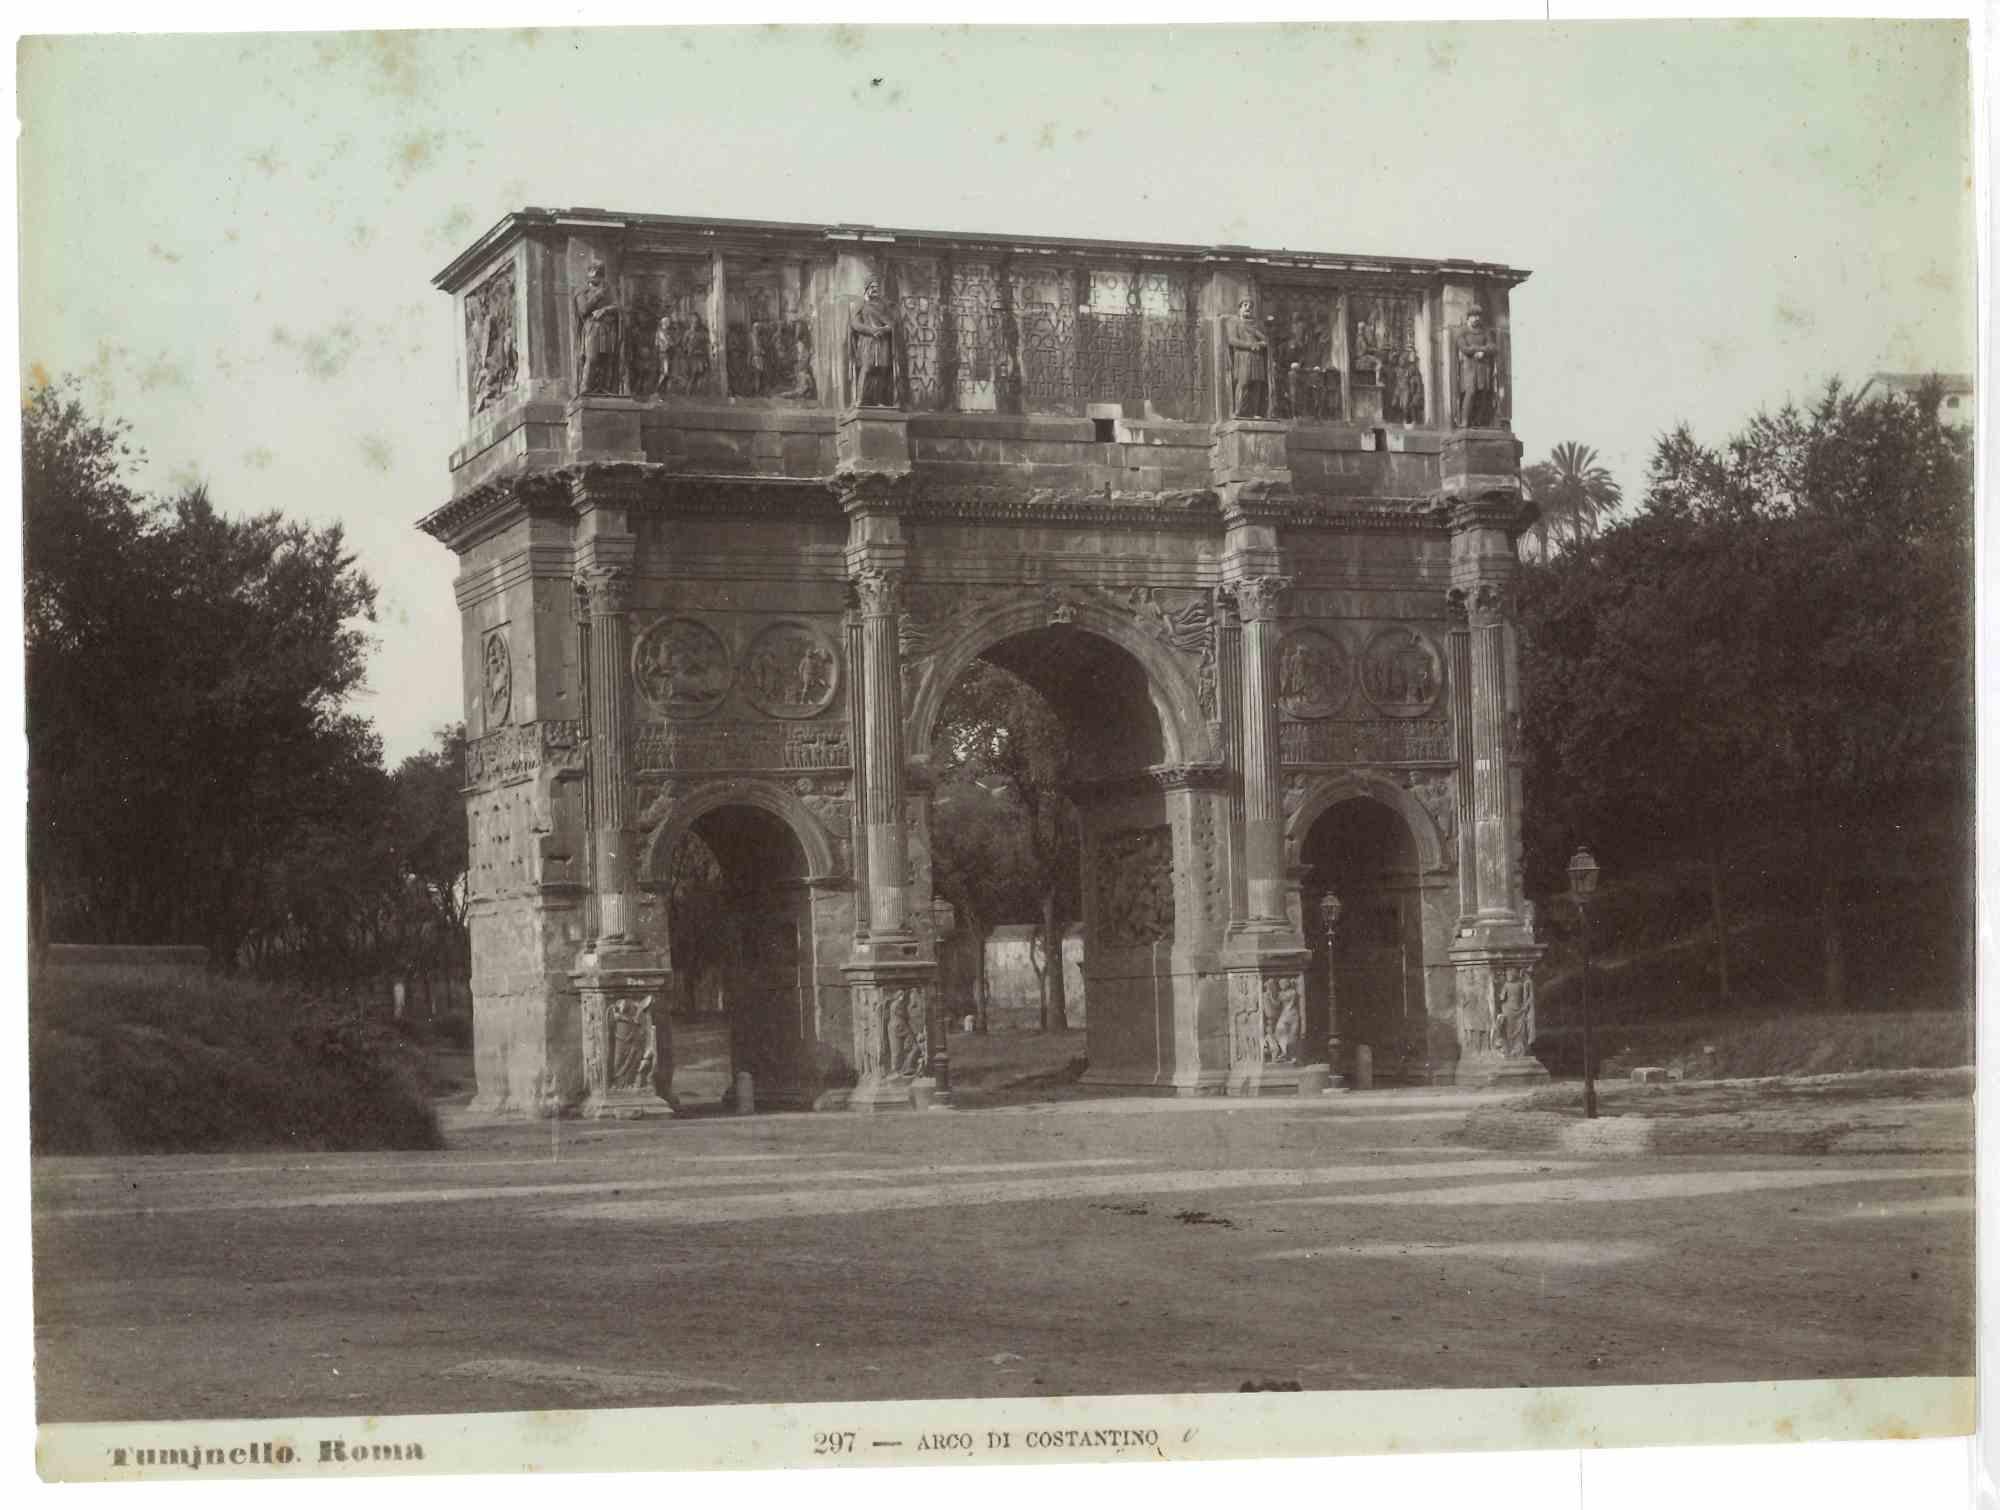 Arch of Constantine is a vintage print in salt silver realized by Ludovico Tuminello in the early 20th Century.

Titled on the lower.

Good conditions except for some foxing.